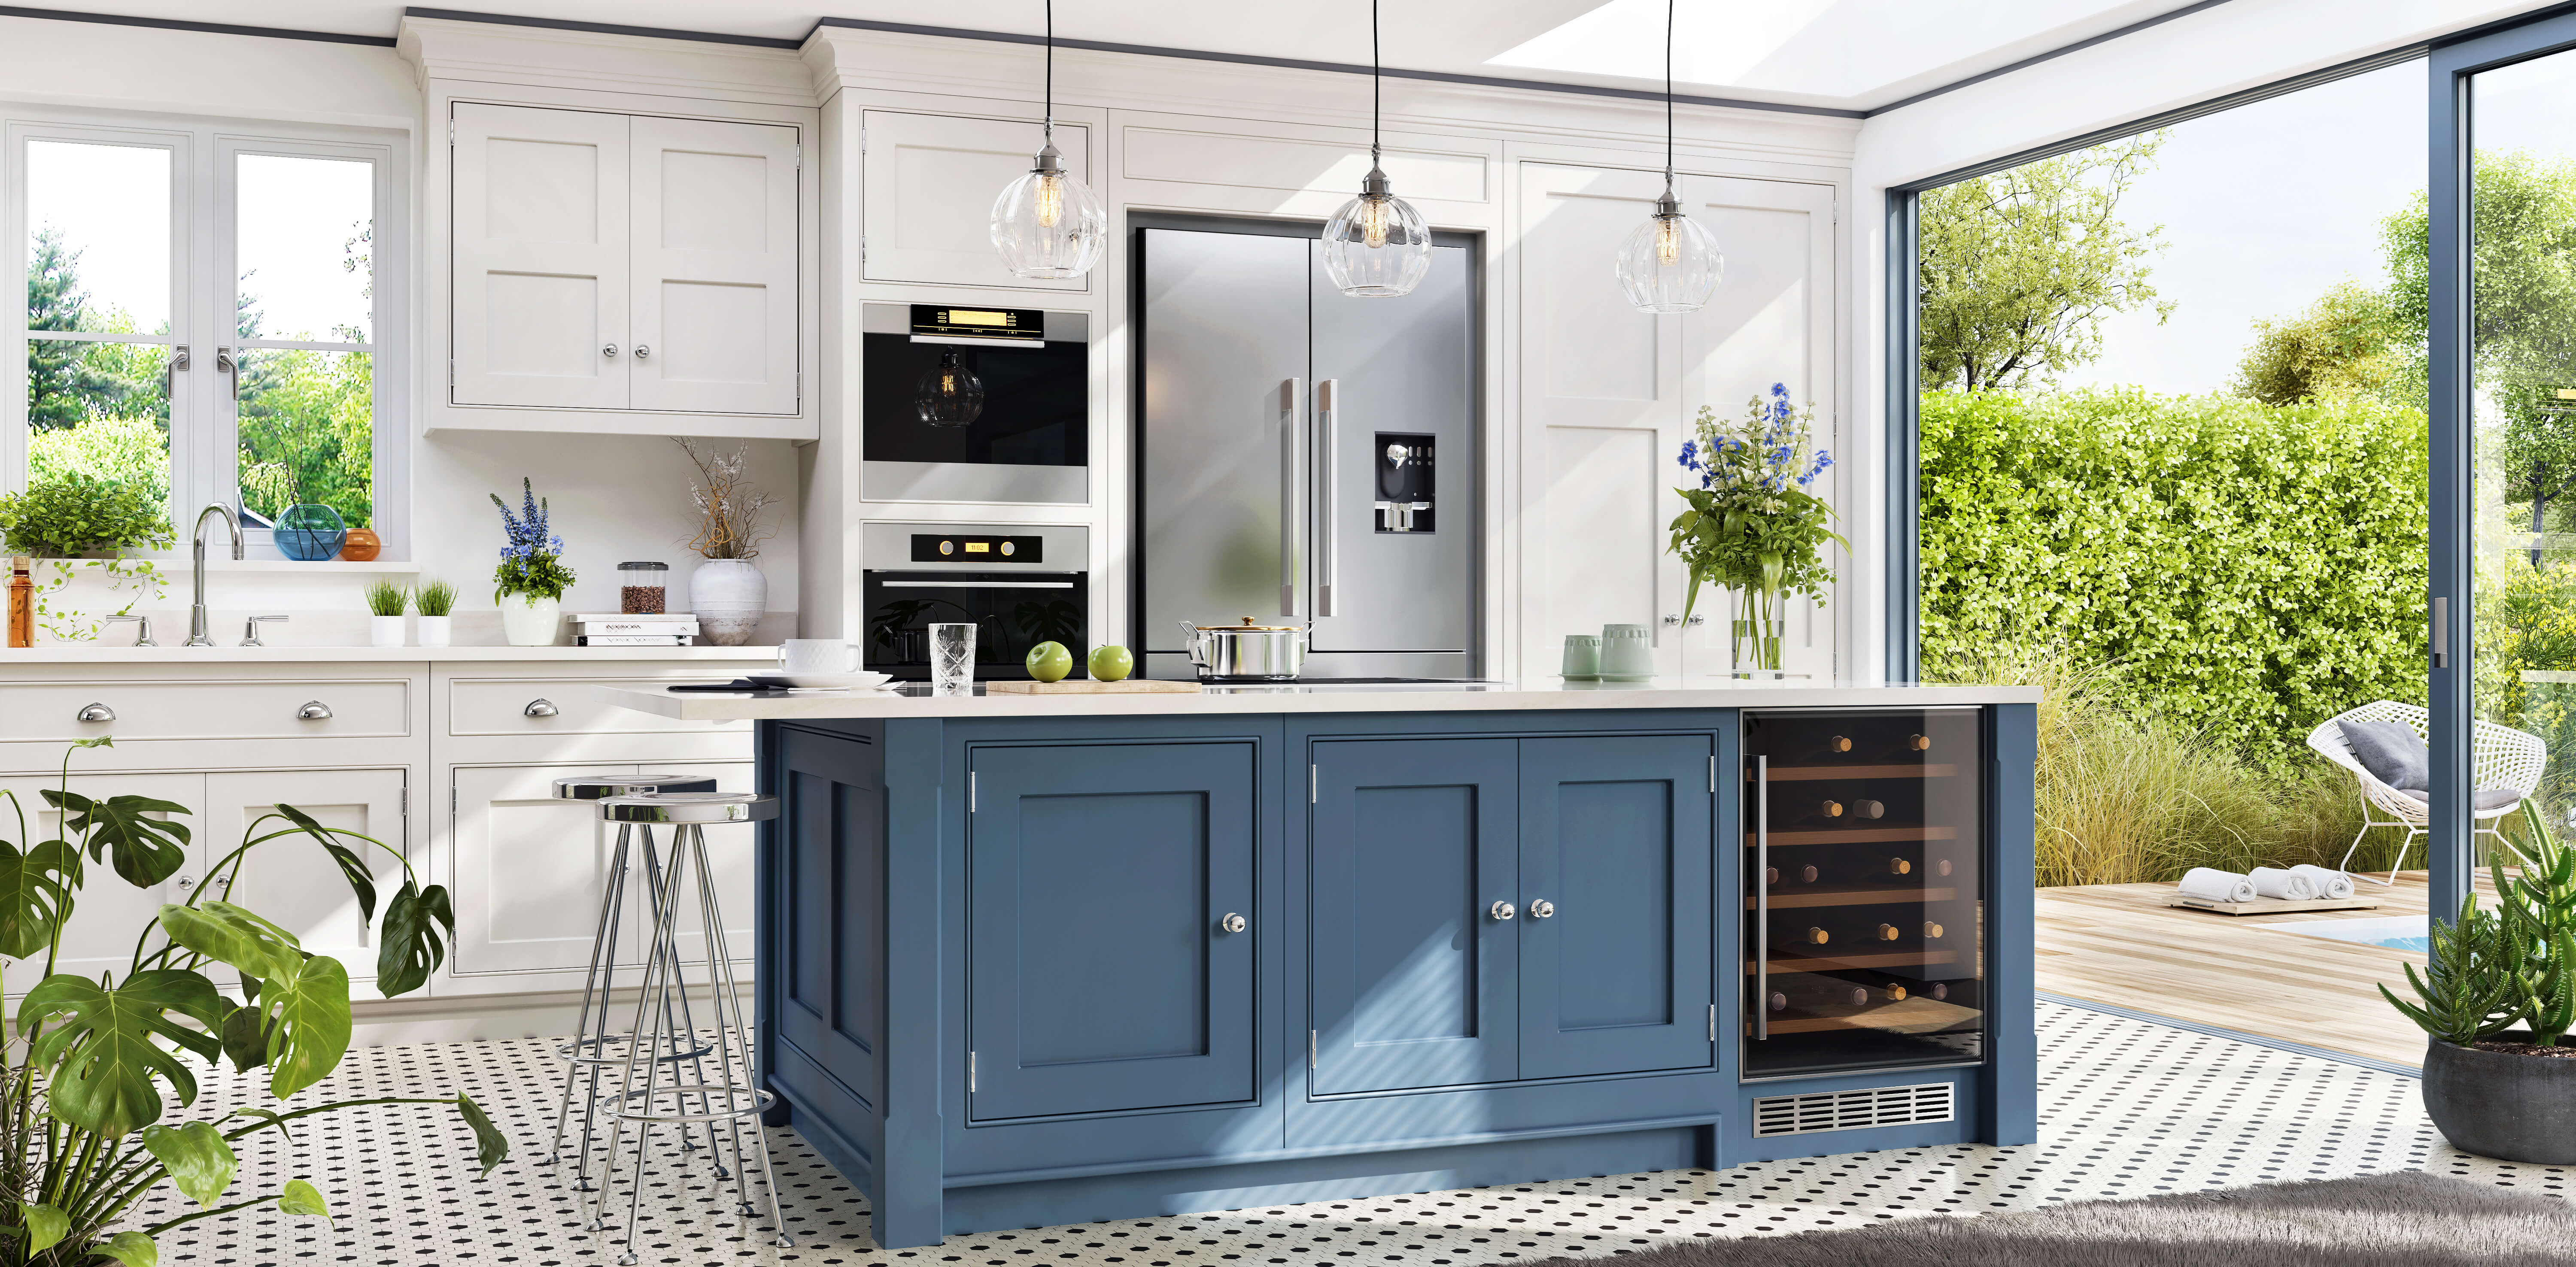 A blue kitchen island in the middle of a white kitchen